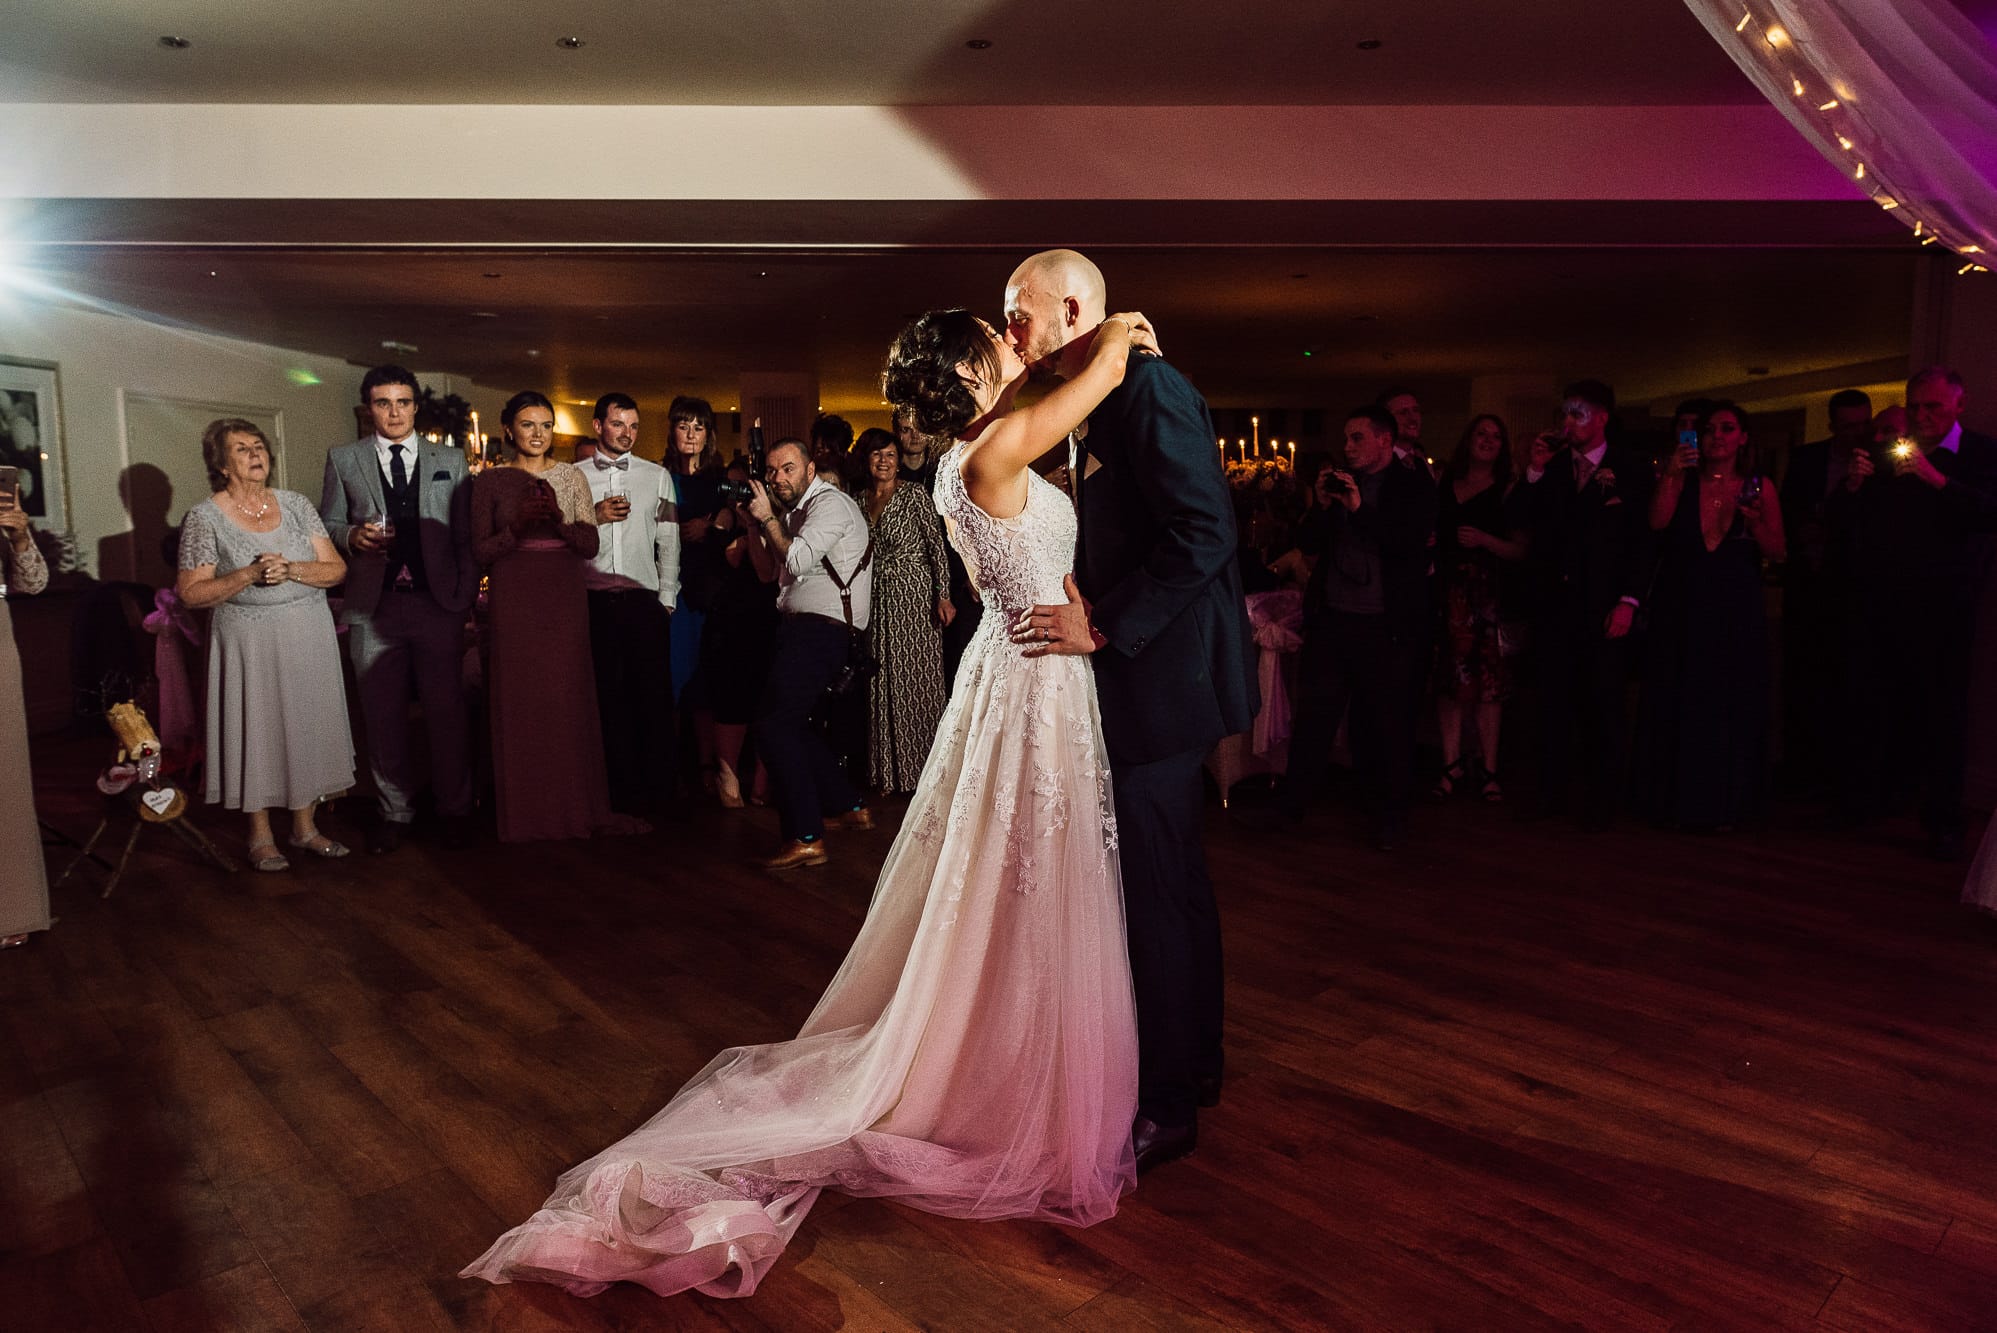 First dance at Mitton Hall